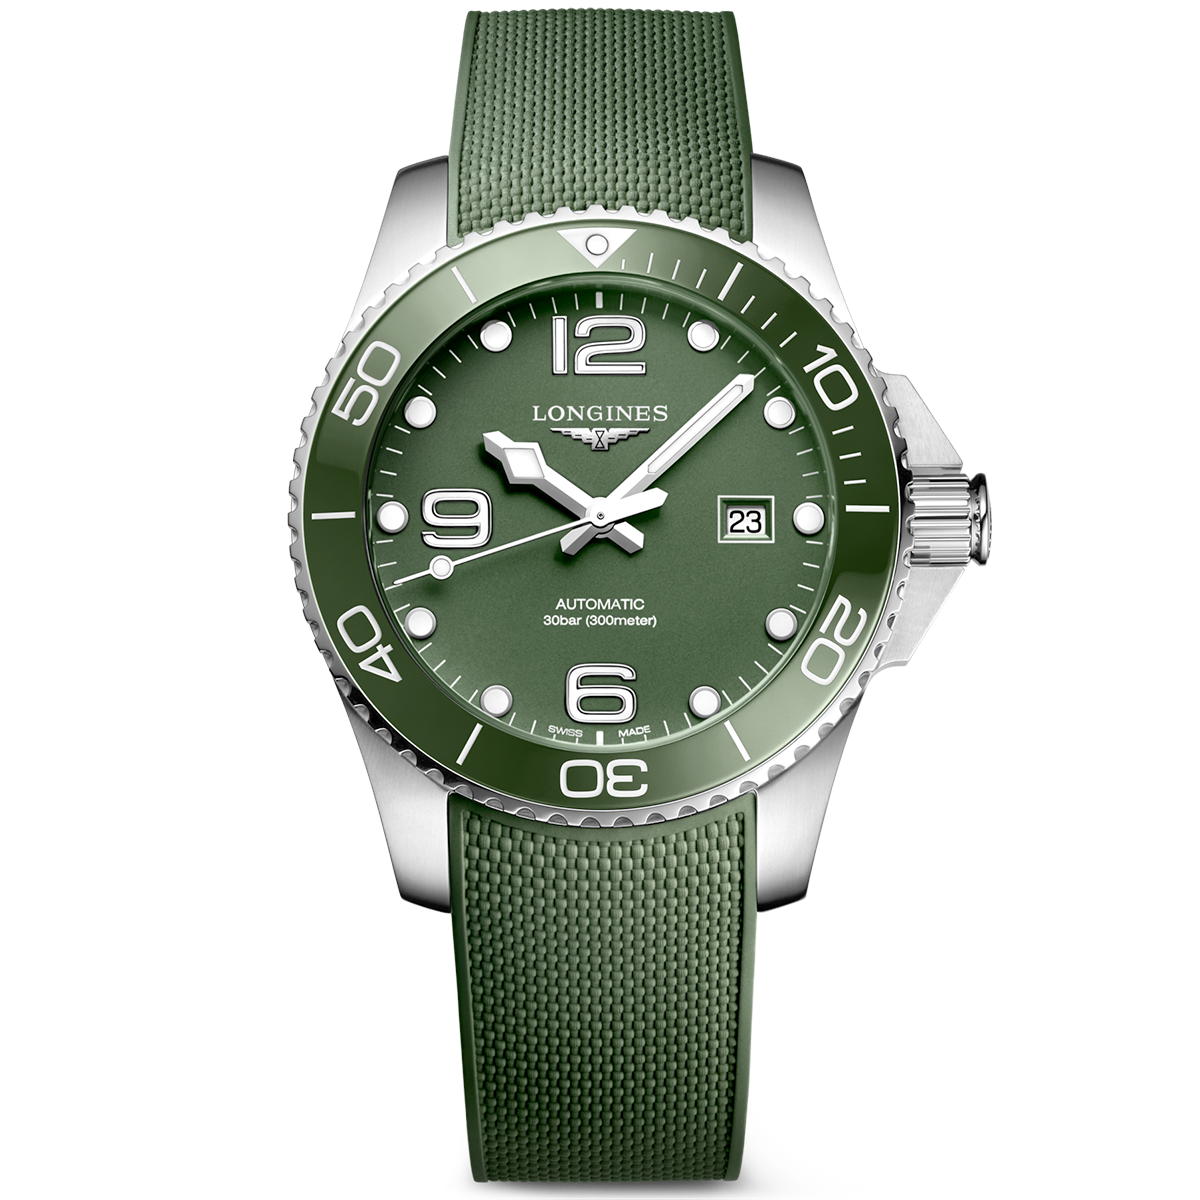 HydroConquest 43mm Green Dial Automatic Rubber Strap Watch